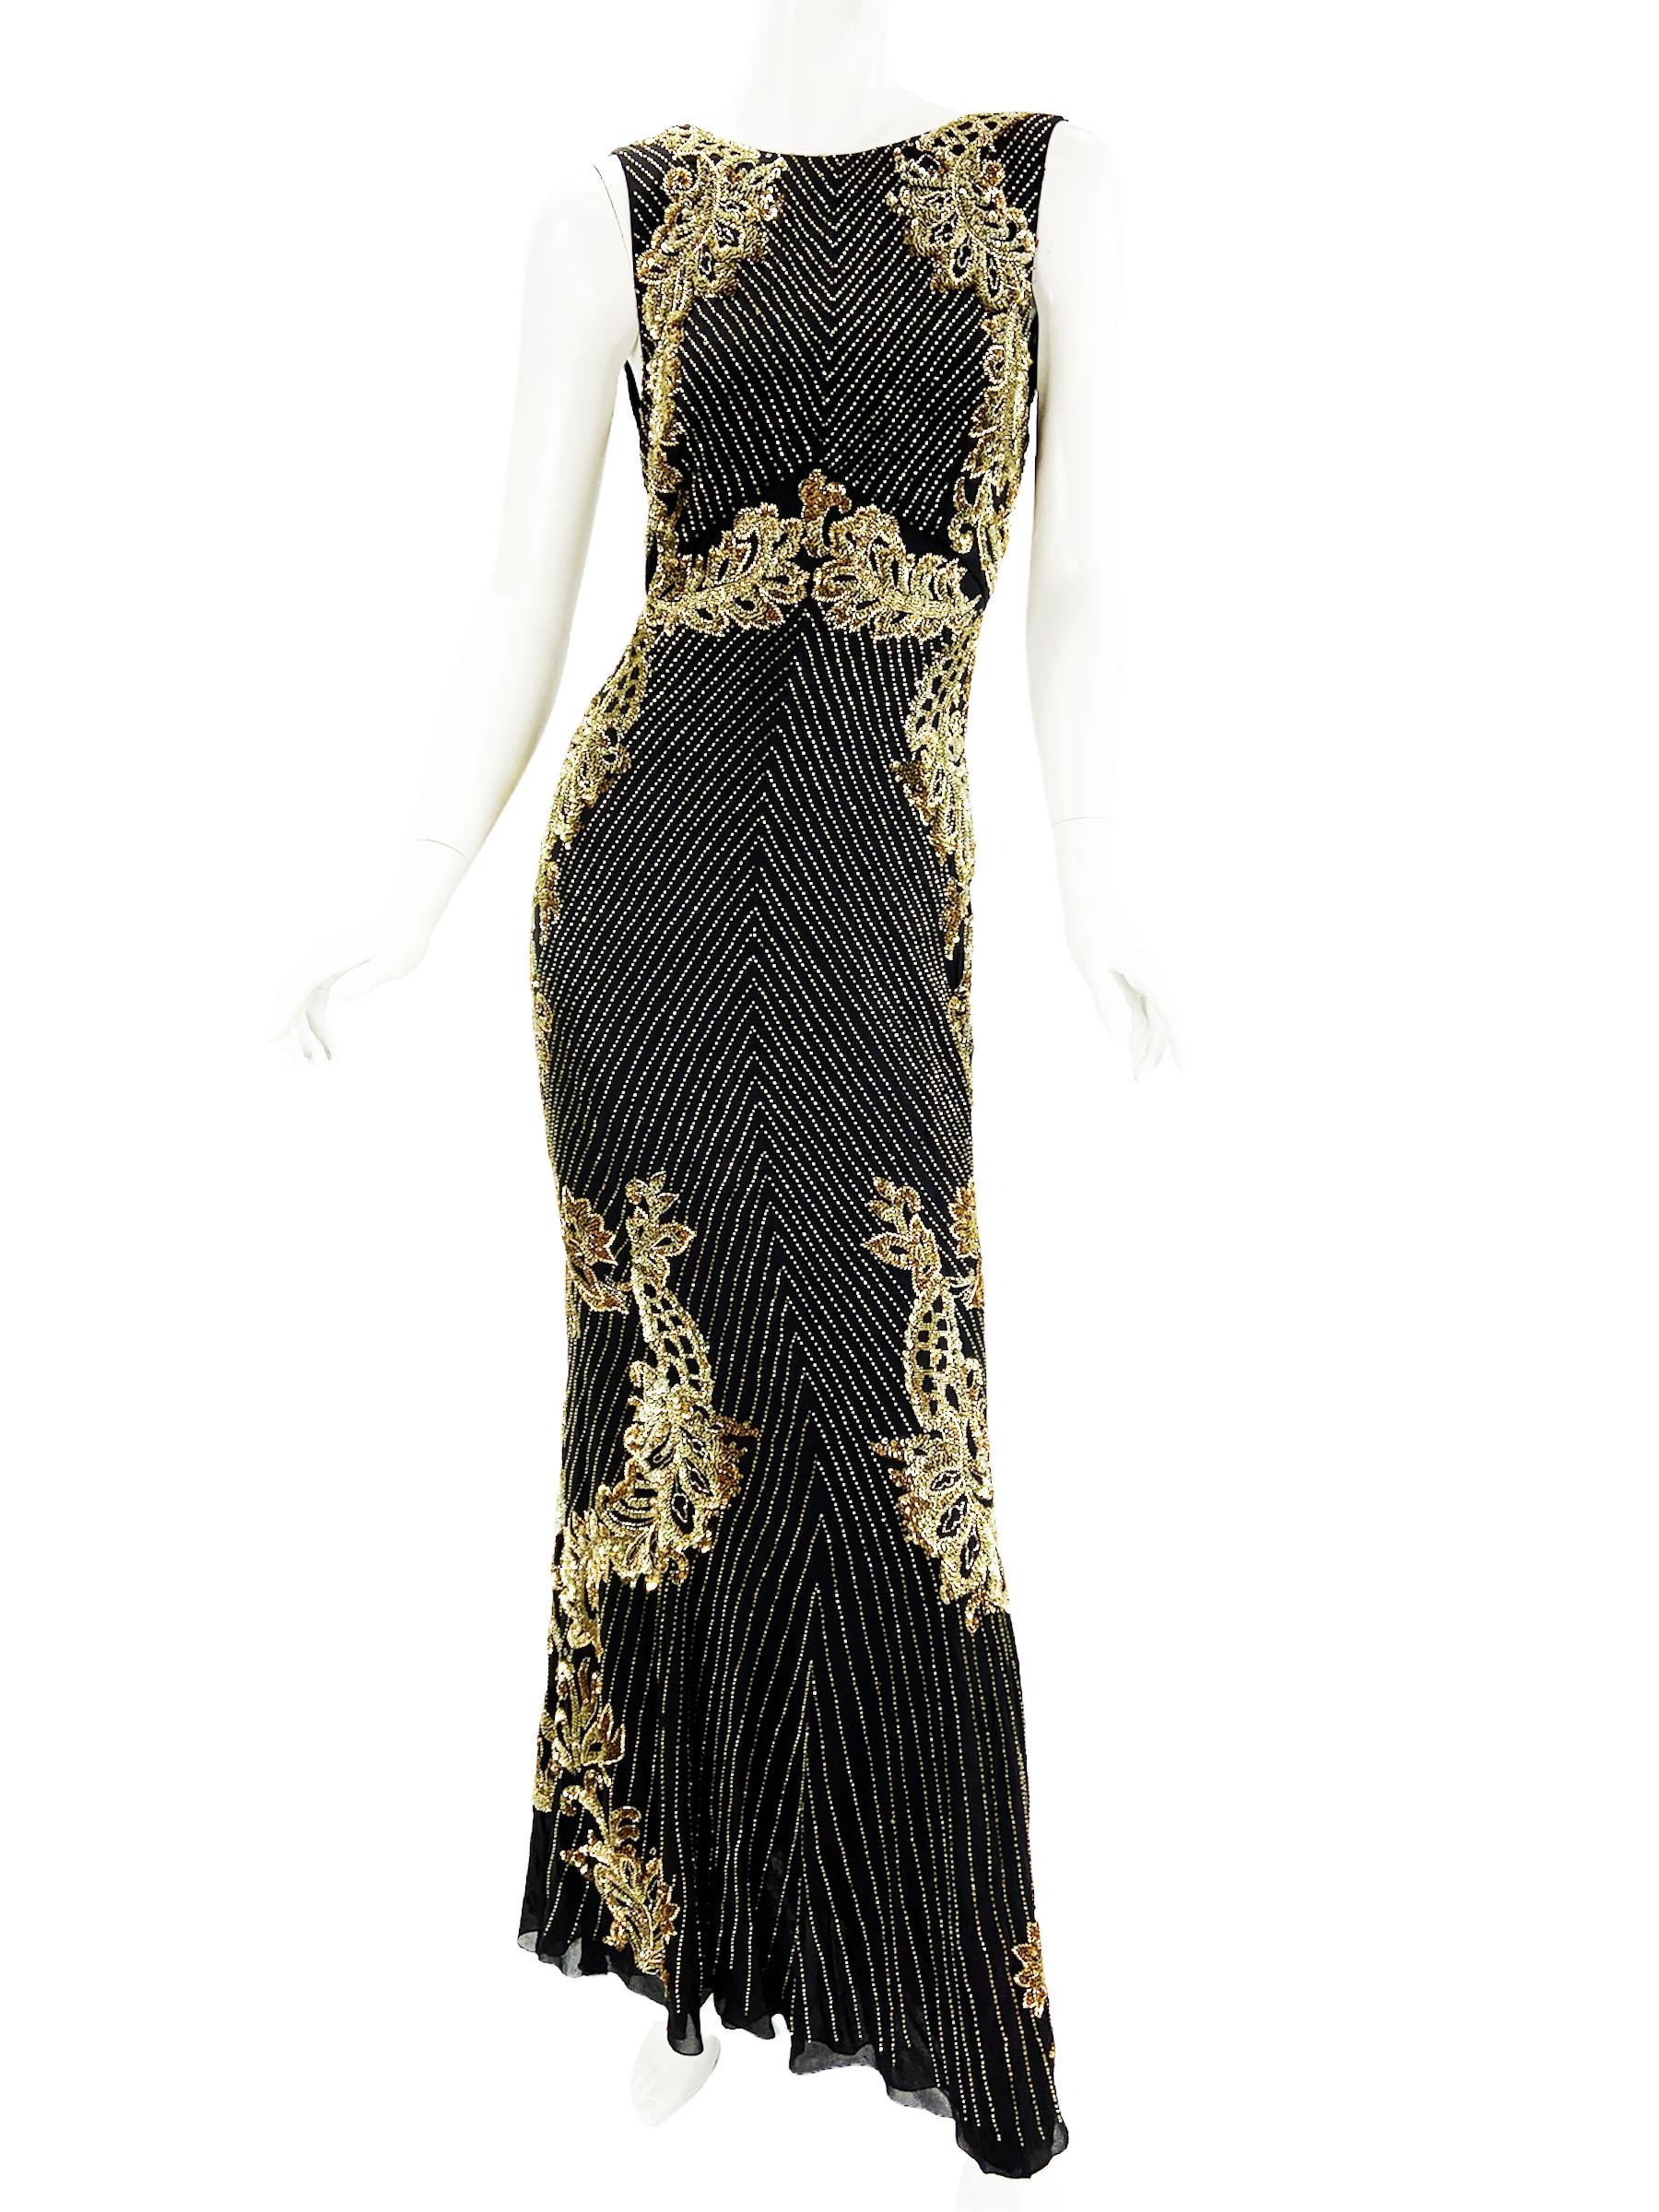 New Roberto Cavalli Black Silk Fully Embellished Dress Gown
F/W 2015 Collection
Italian size 42 - US 6
Fully Embellished in Gold and Silver Sequins and Beads, Fully Lined, Back Zip Closure.
Measurements: Length - 57 inches, Bust - 36